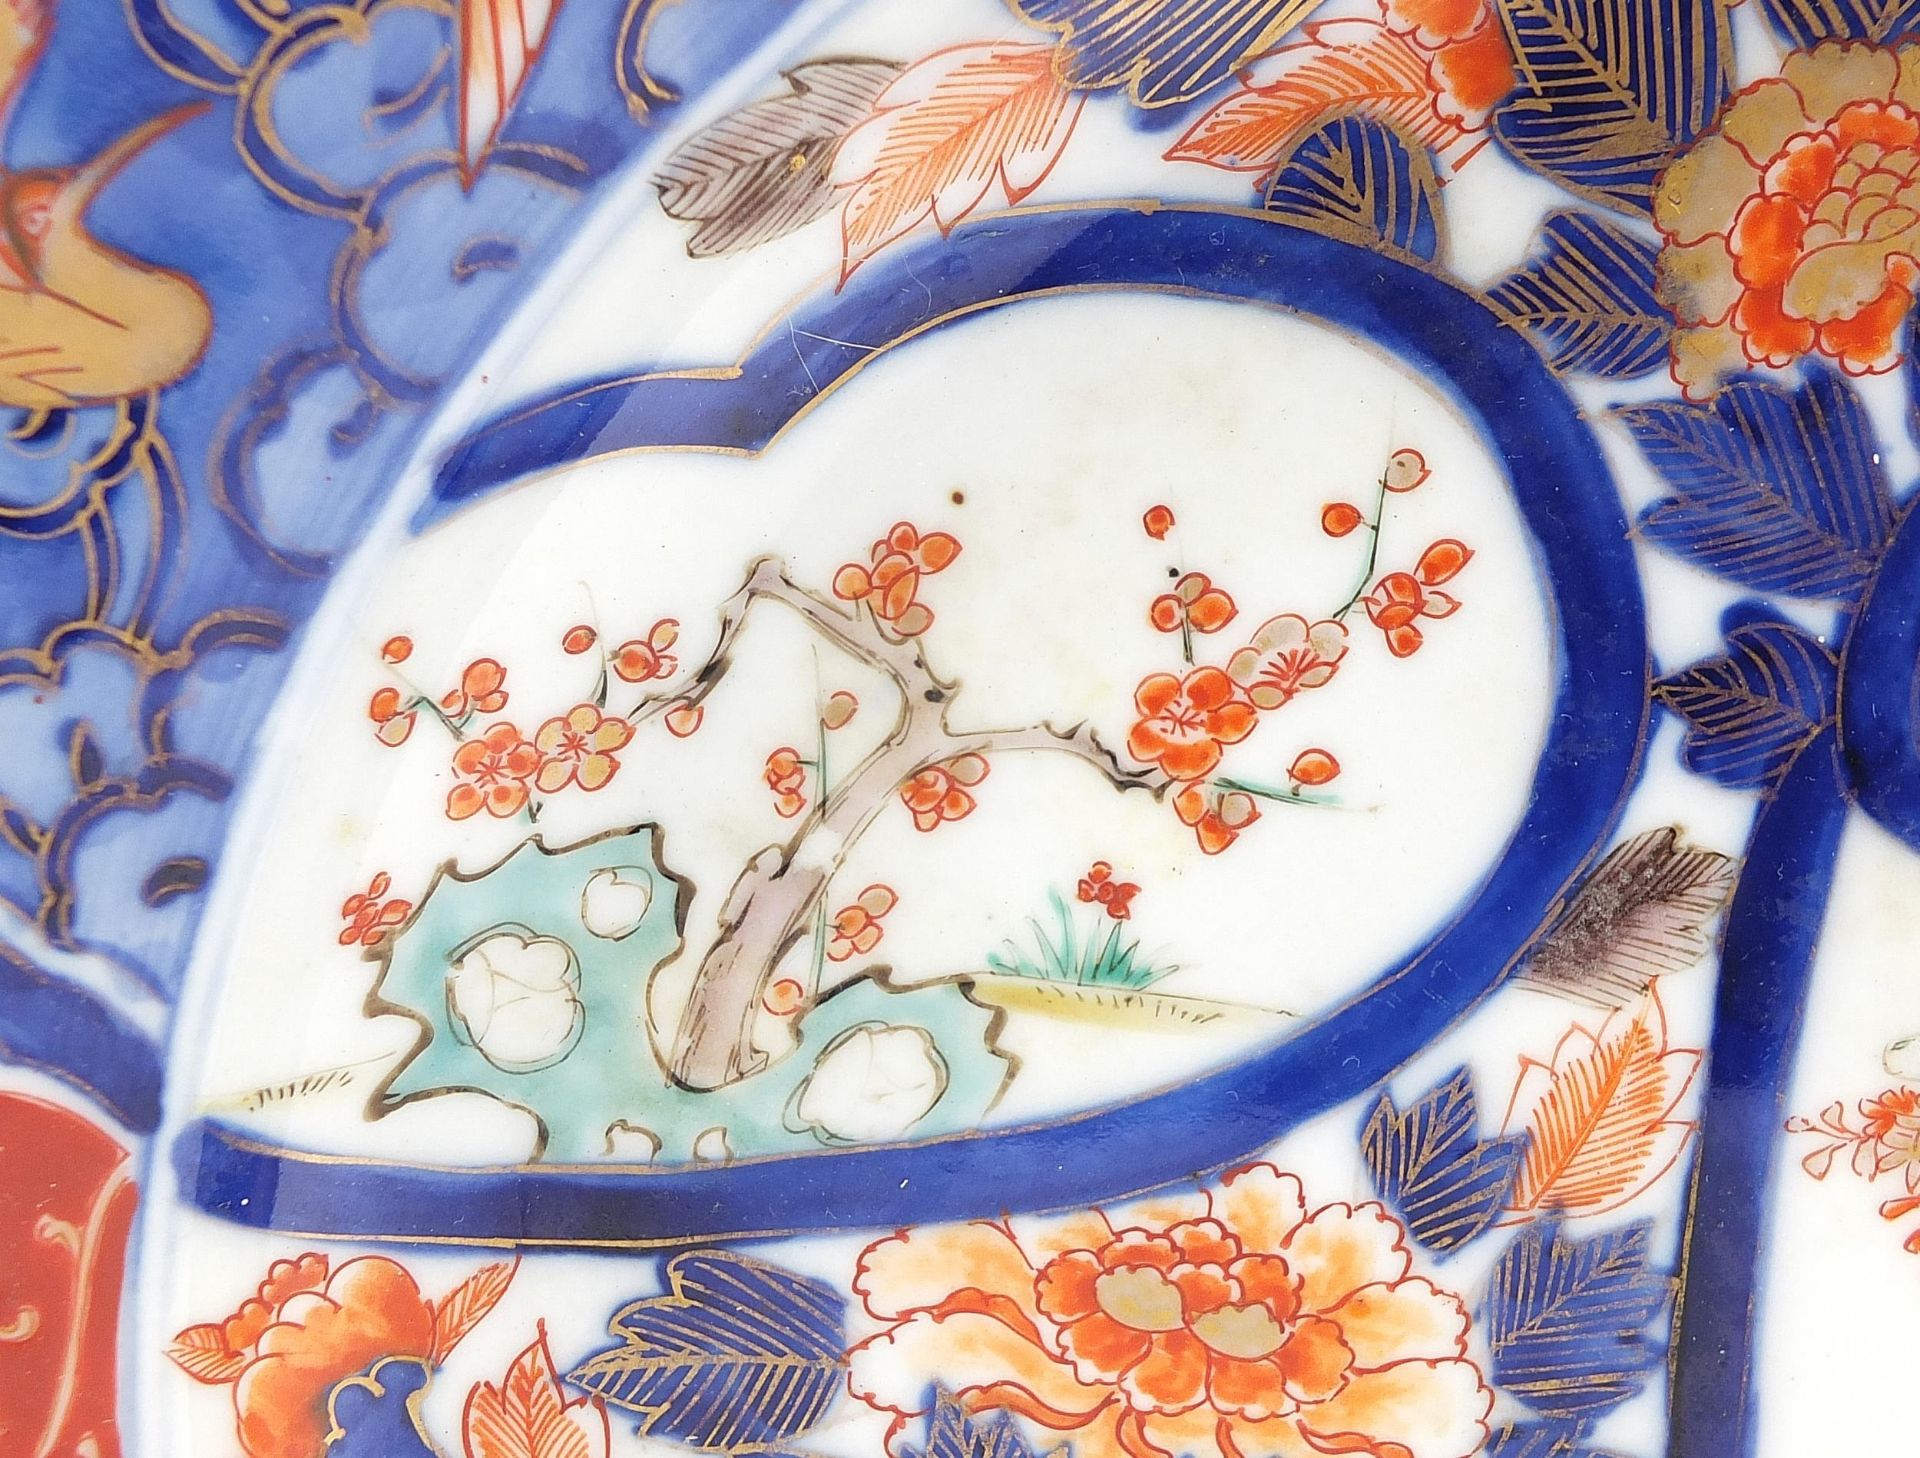 Japanese Imari porcelain charger hand painted with figures, birds and flowers, 41cm in diameter - Image 3 of 4